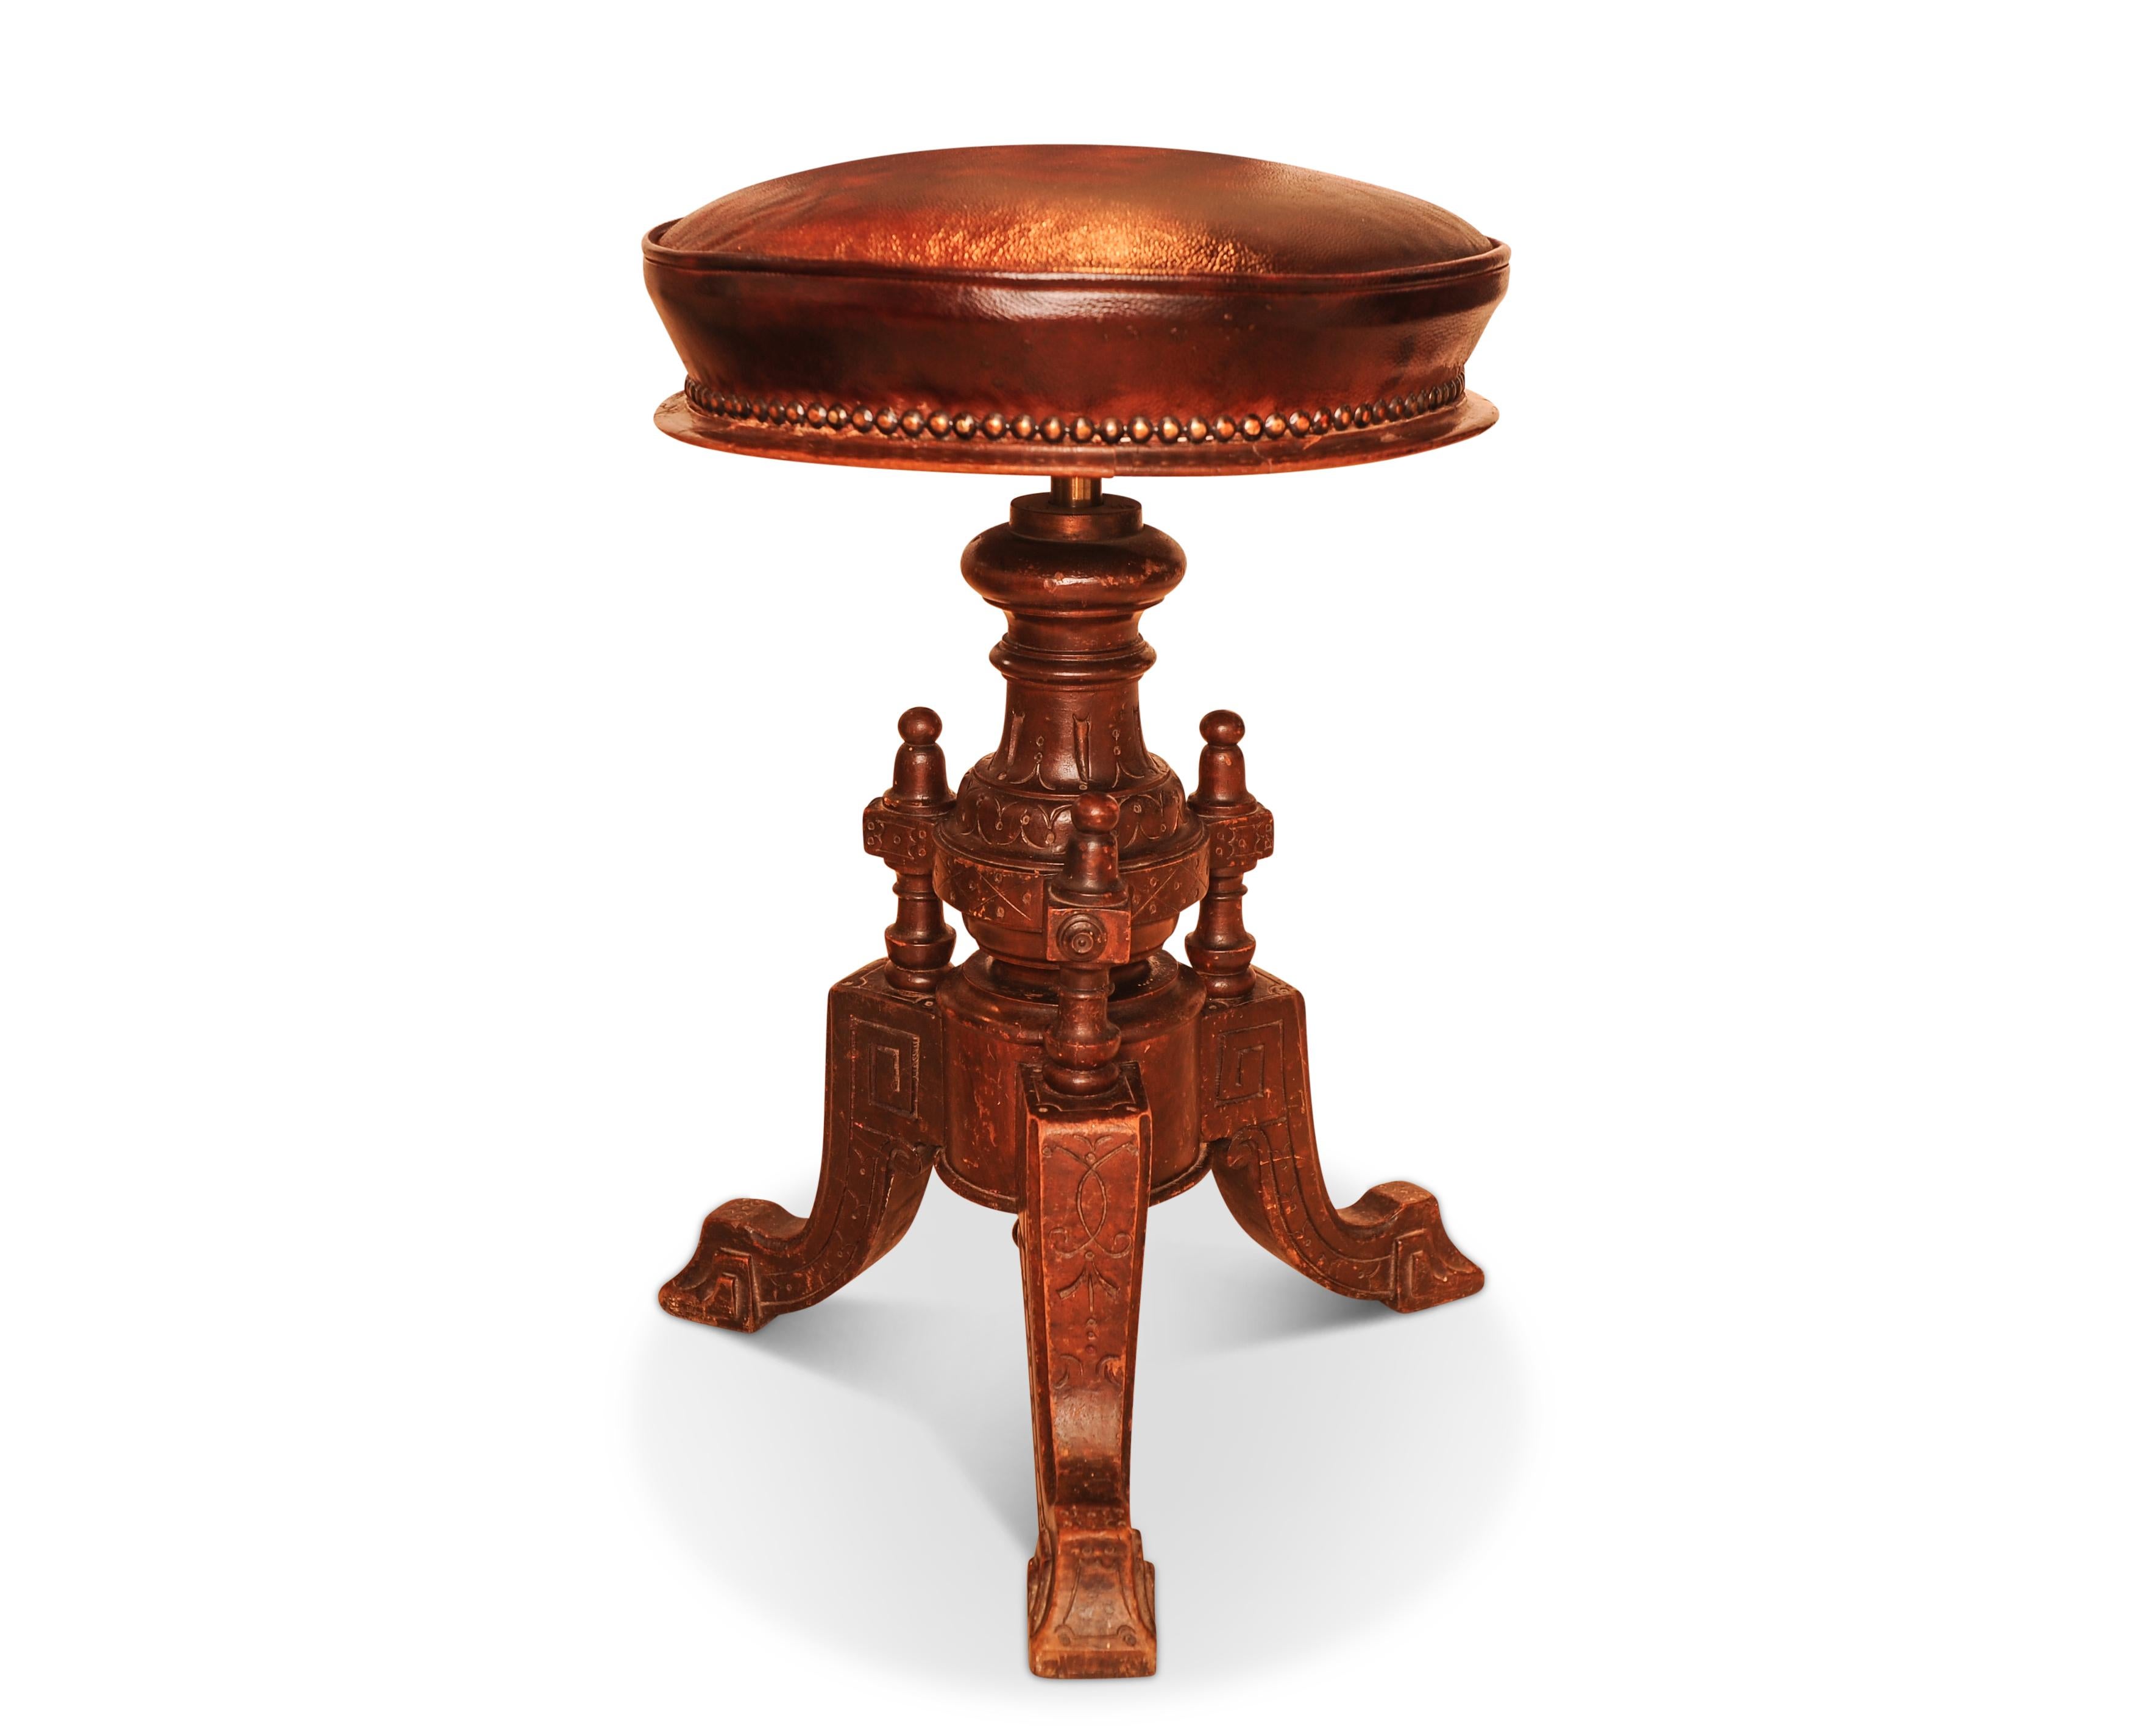 Hand-Crafted Victorian Carved Wood Revolving Piano Stool With Brown Leather Seat Brass Studs For Sale